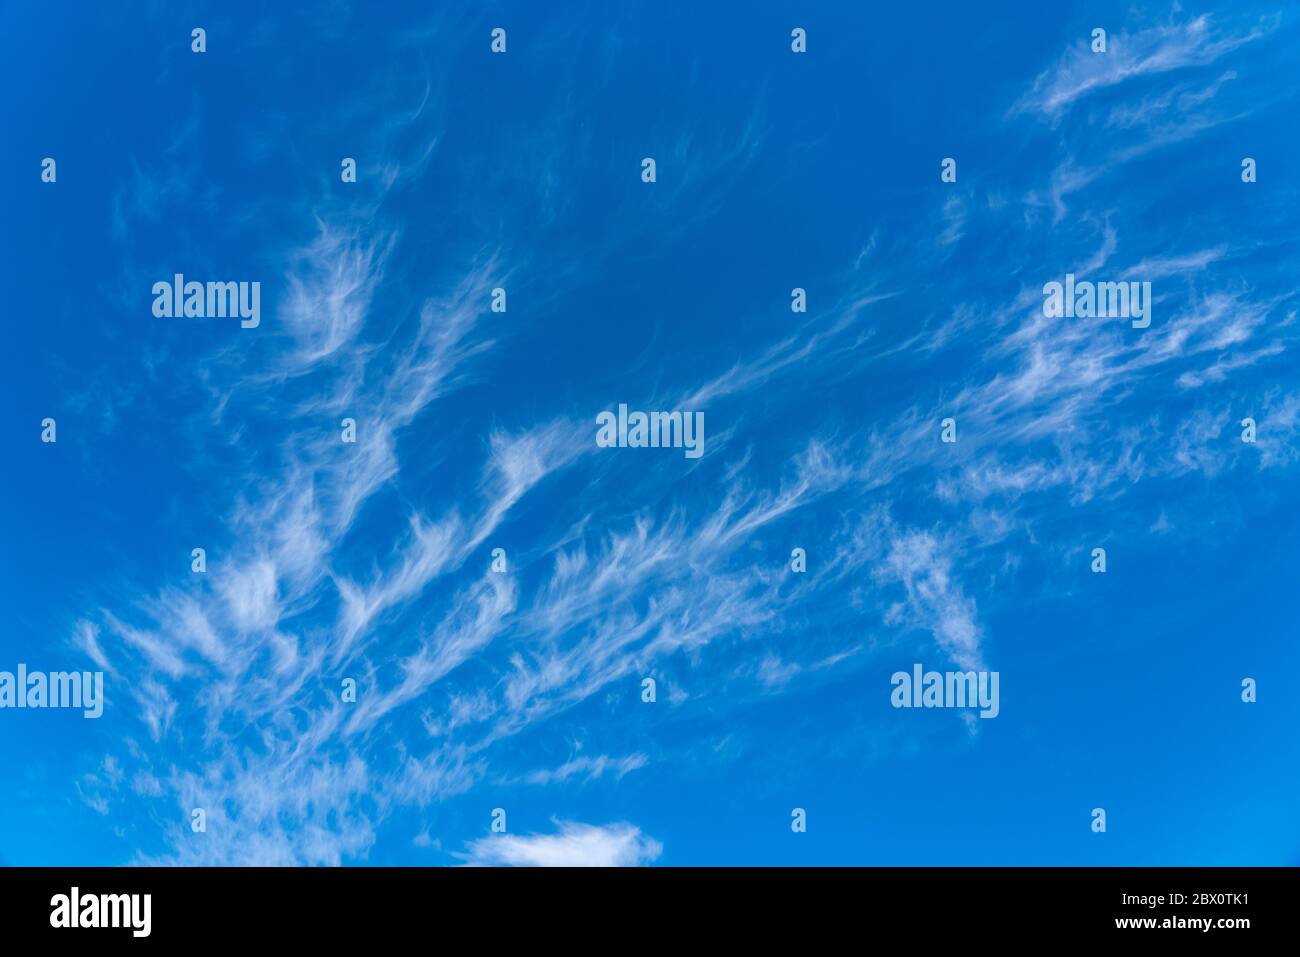 Blue sky with cirrus clouds, filigree ice clouds at high altitude, harbingers of warmer weather, Stock Photo